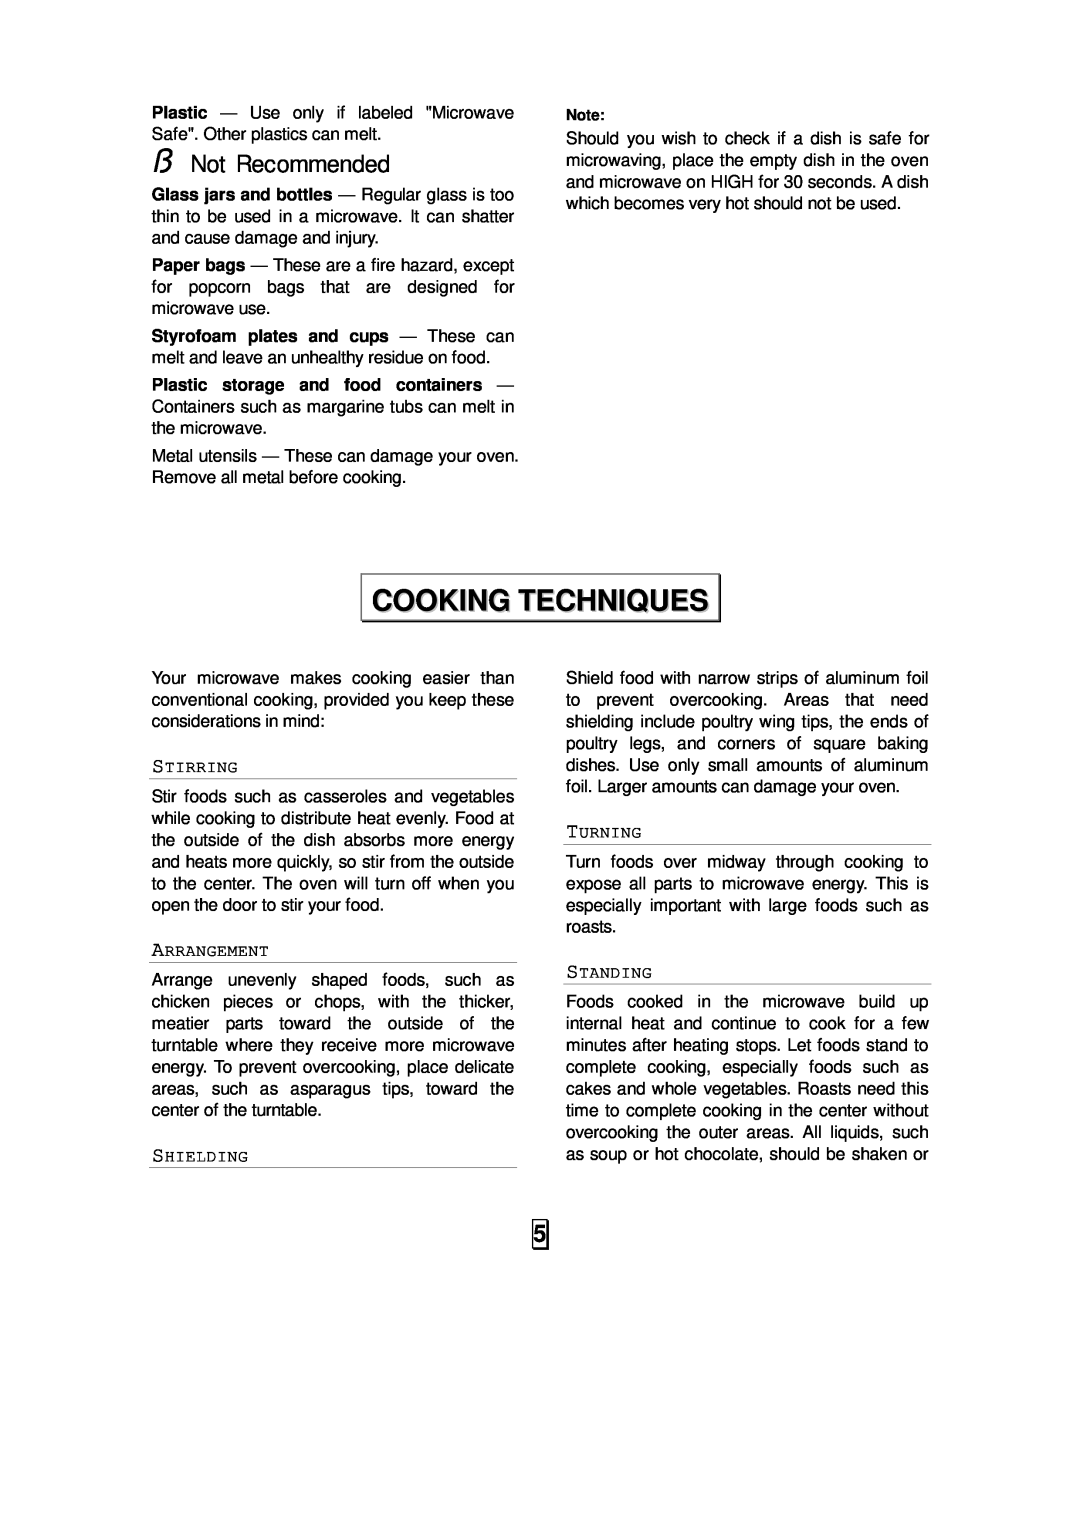 Sunbeam SMW958 owner manual Cooking Techniques, û Not Recommended, Stirring, Arrangement, Shielding, Turning, Standing 